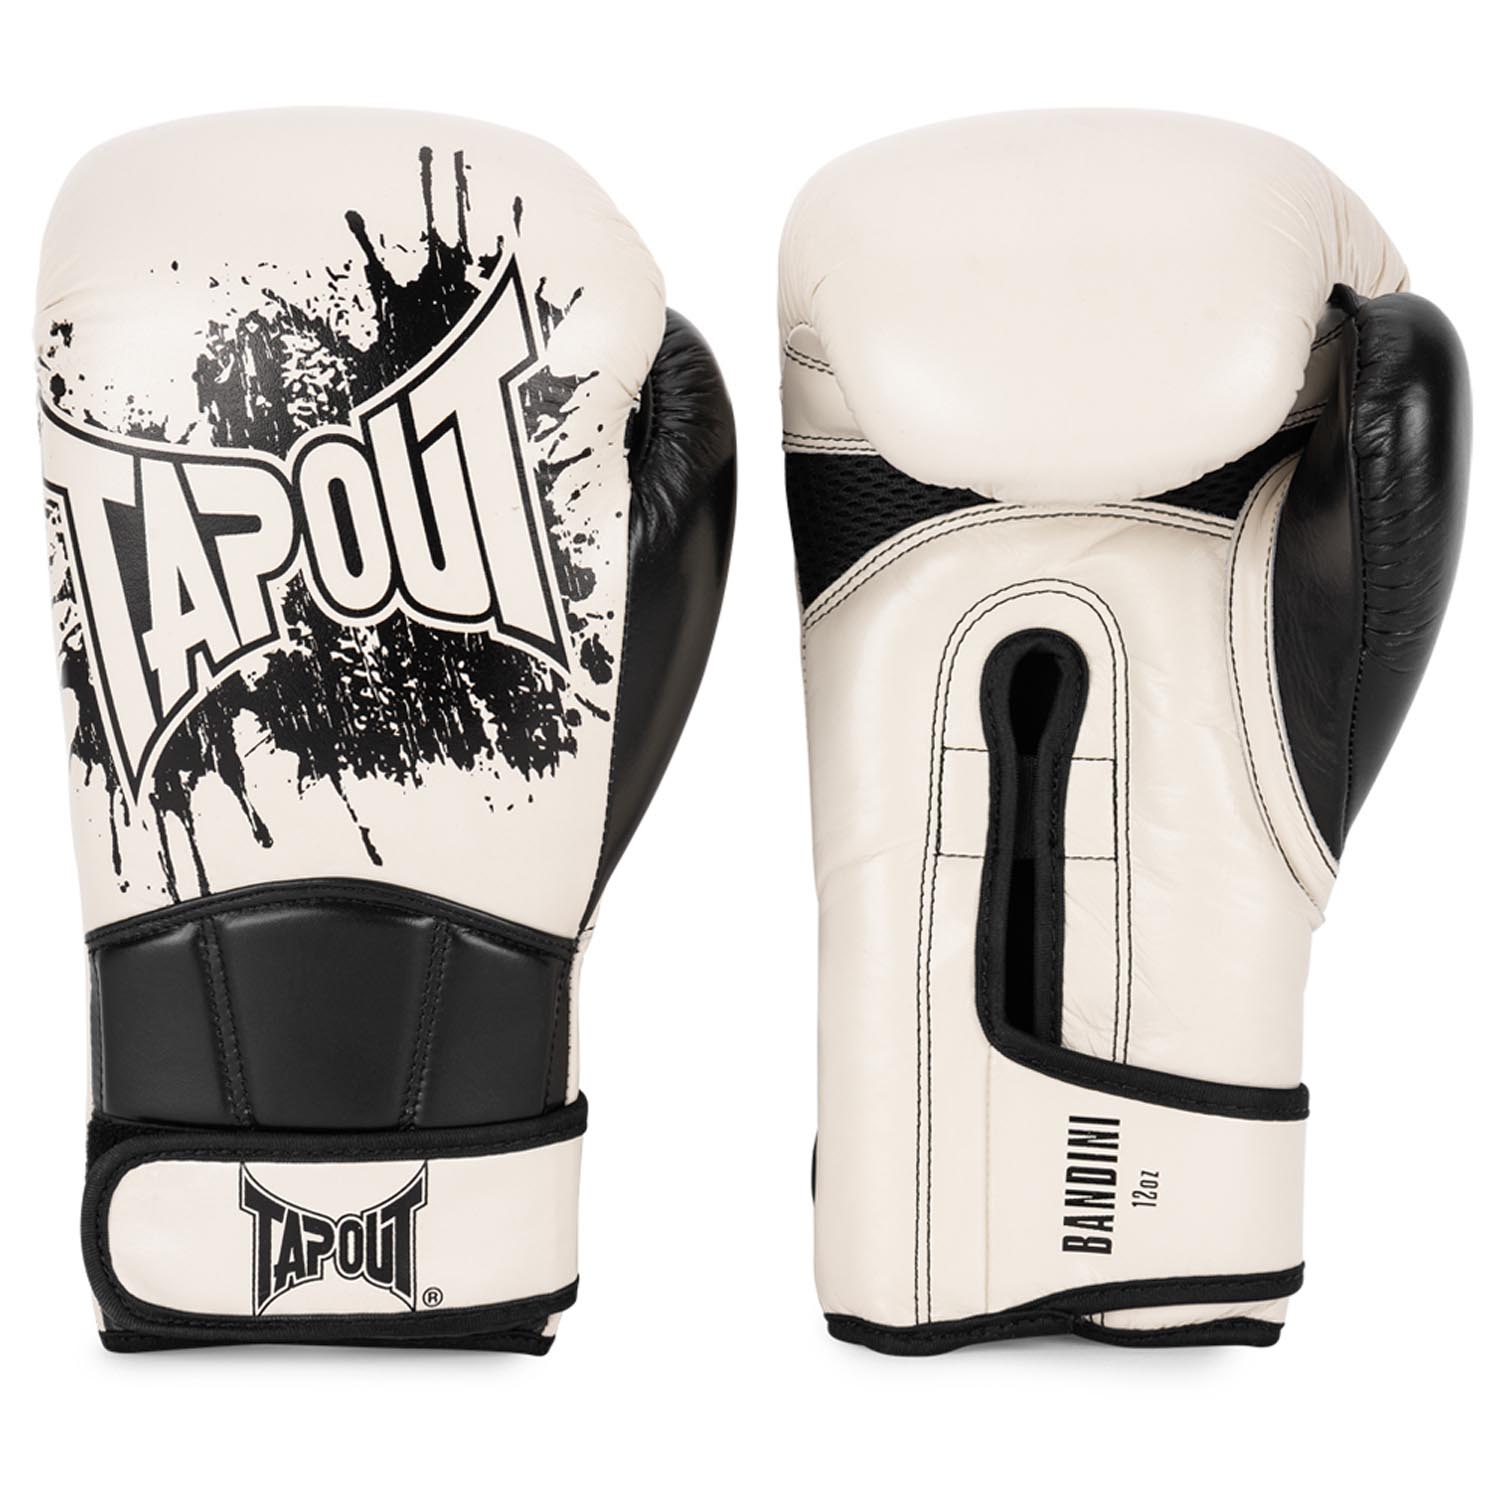 Tapout Boxhandschuhe, Bandini